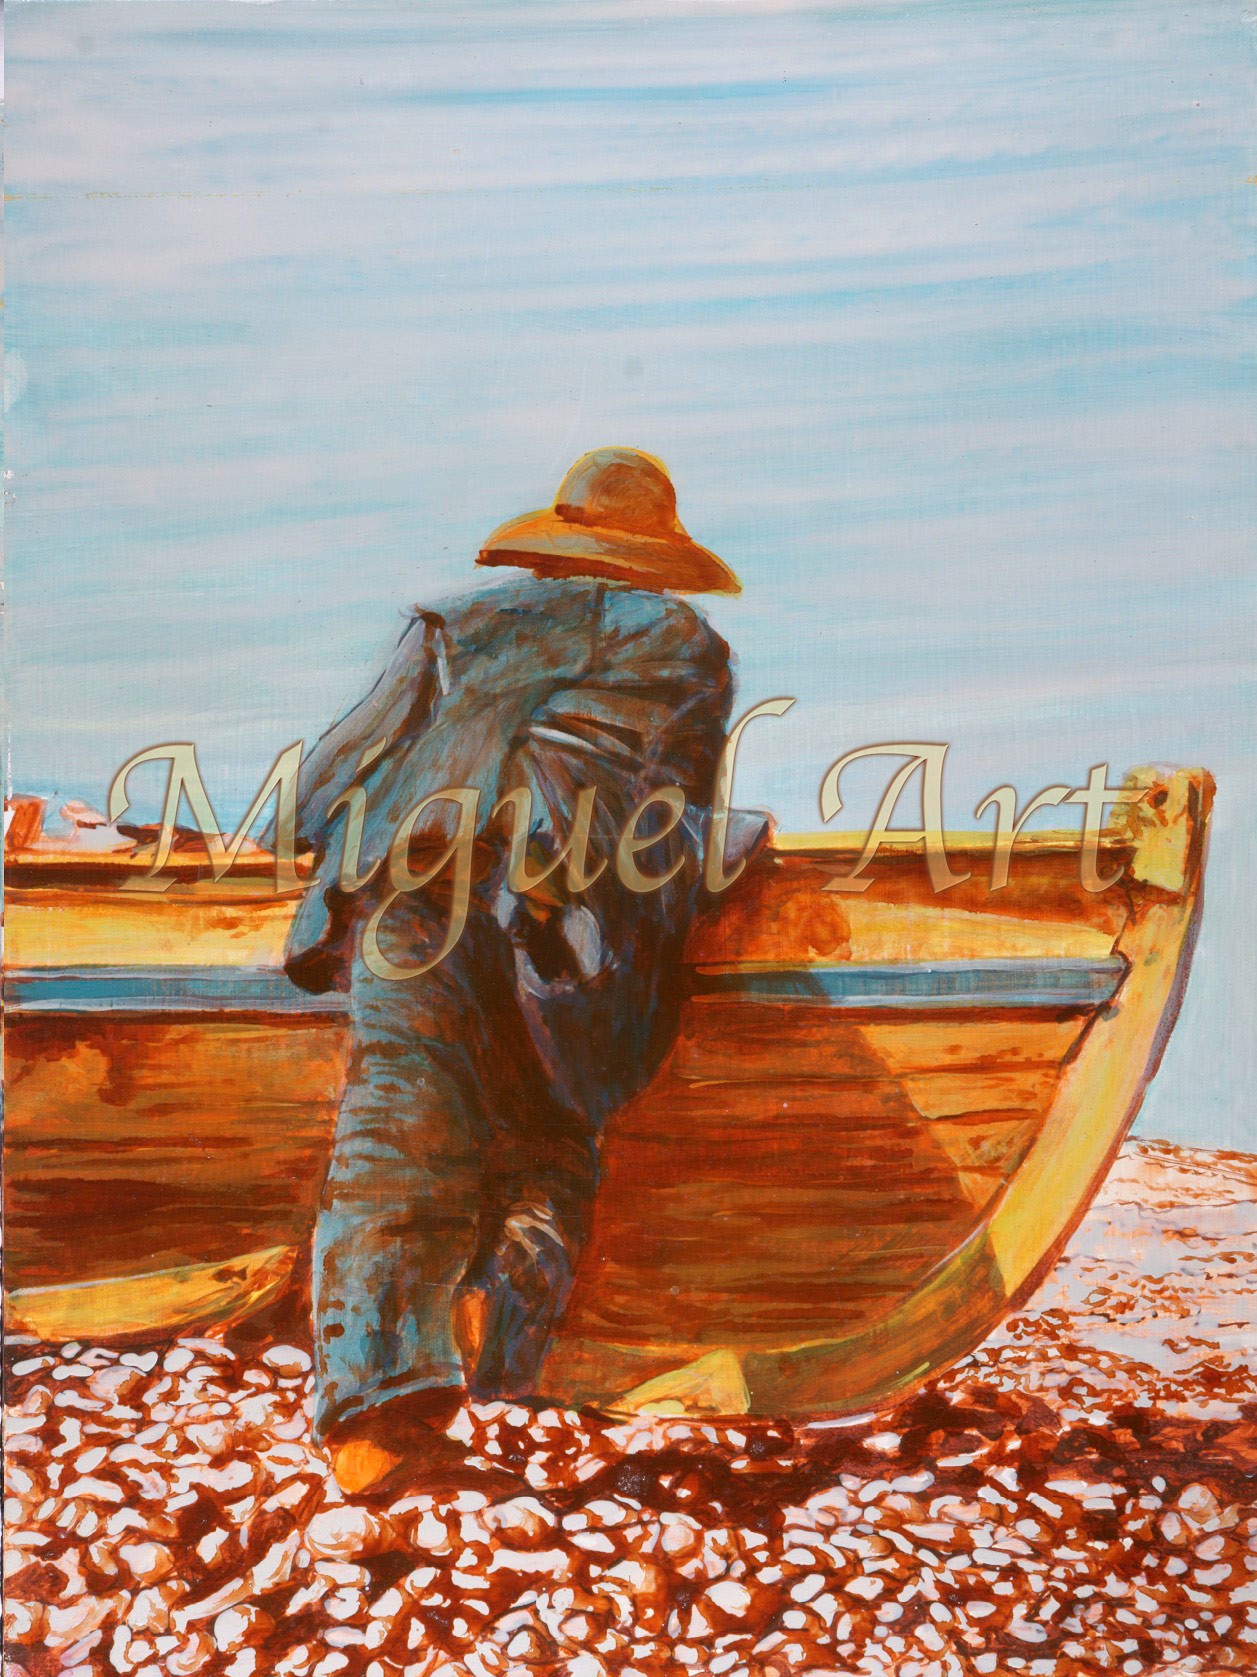 Painting 017 titled Pescador is 21 x 28 inches it is an authentic original and watermarked